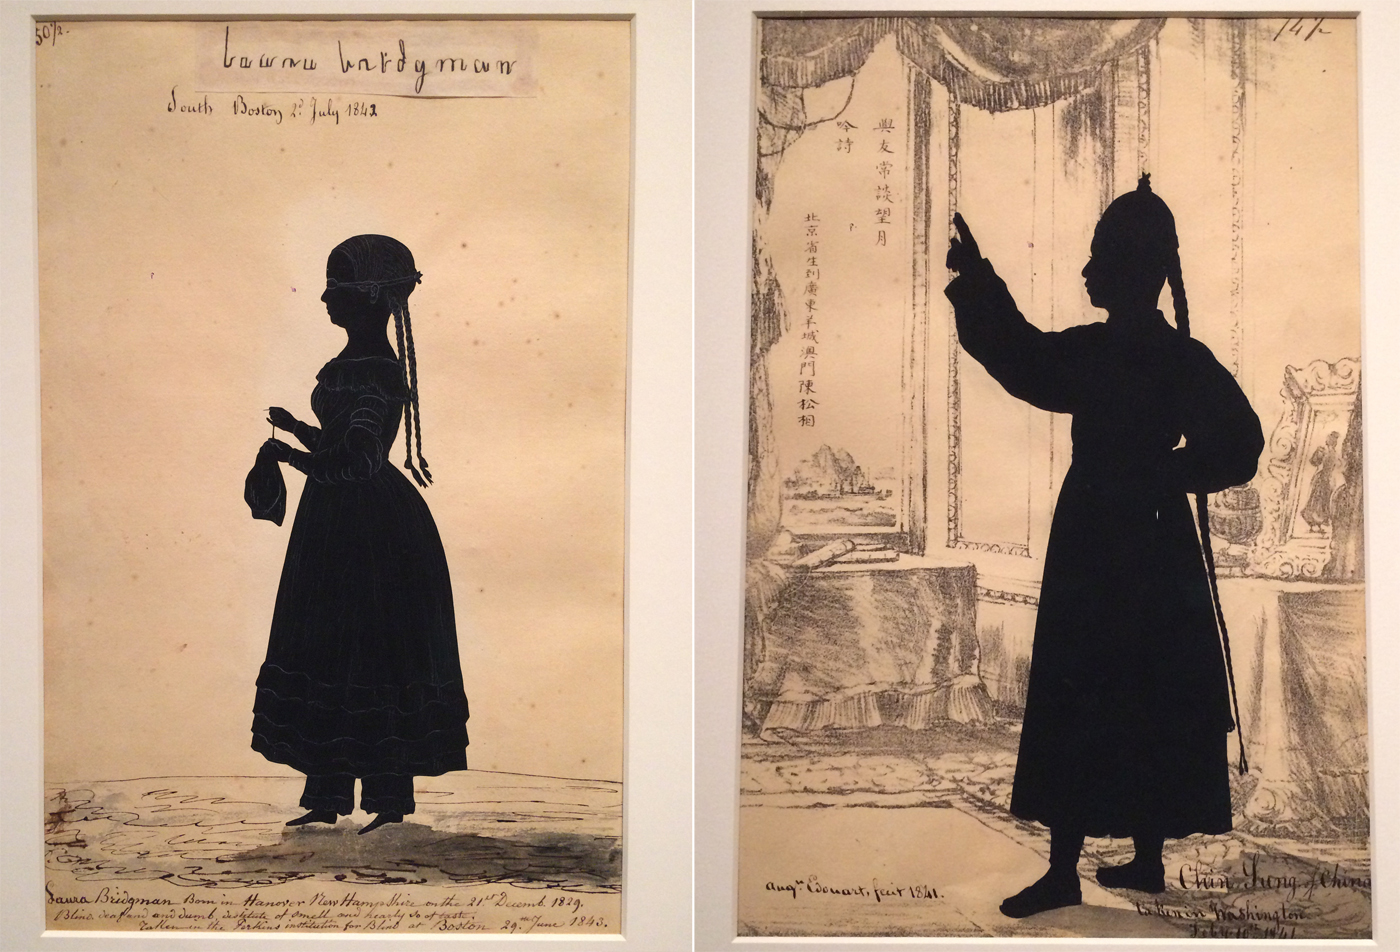 An Outline of Over 200 Years of Silhouettes